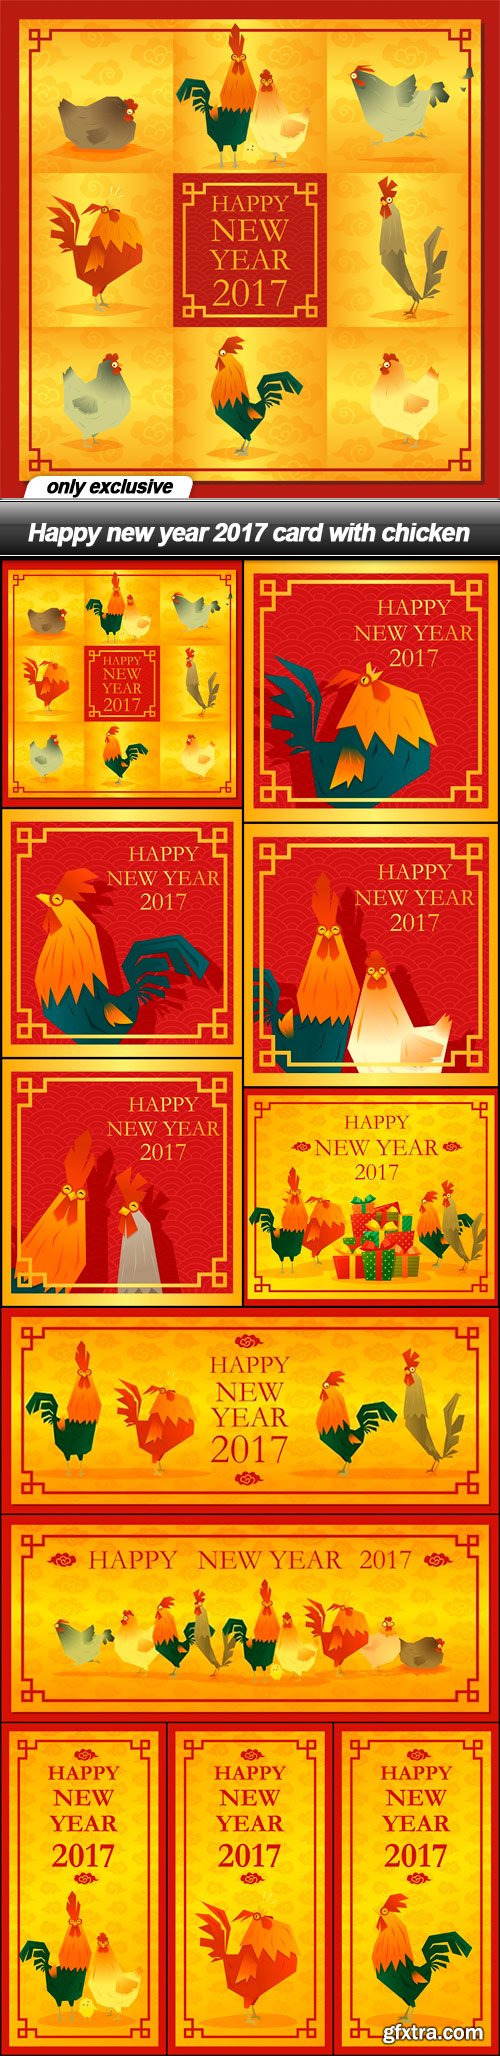 Happy new year 2017 card with chicken - 11 EPS